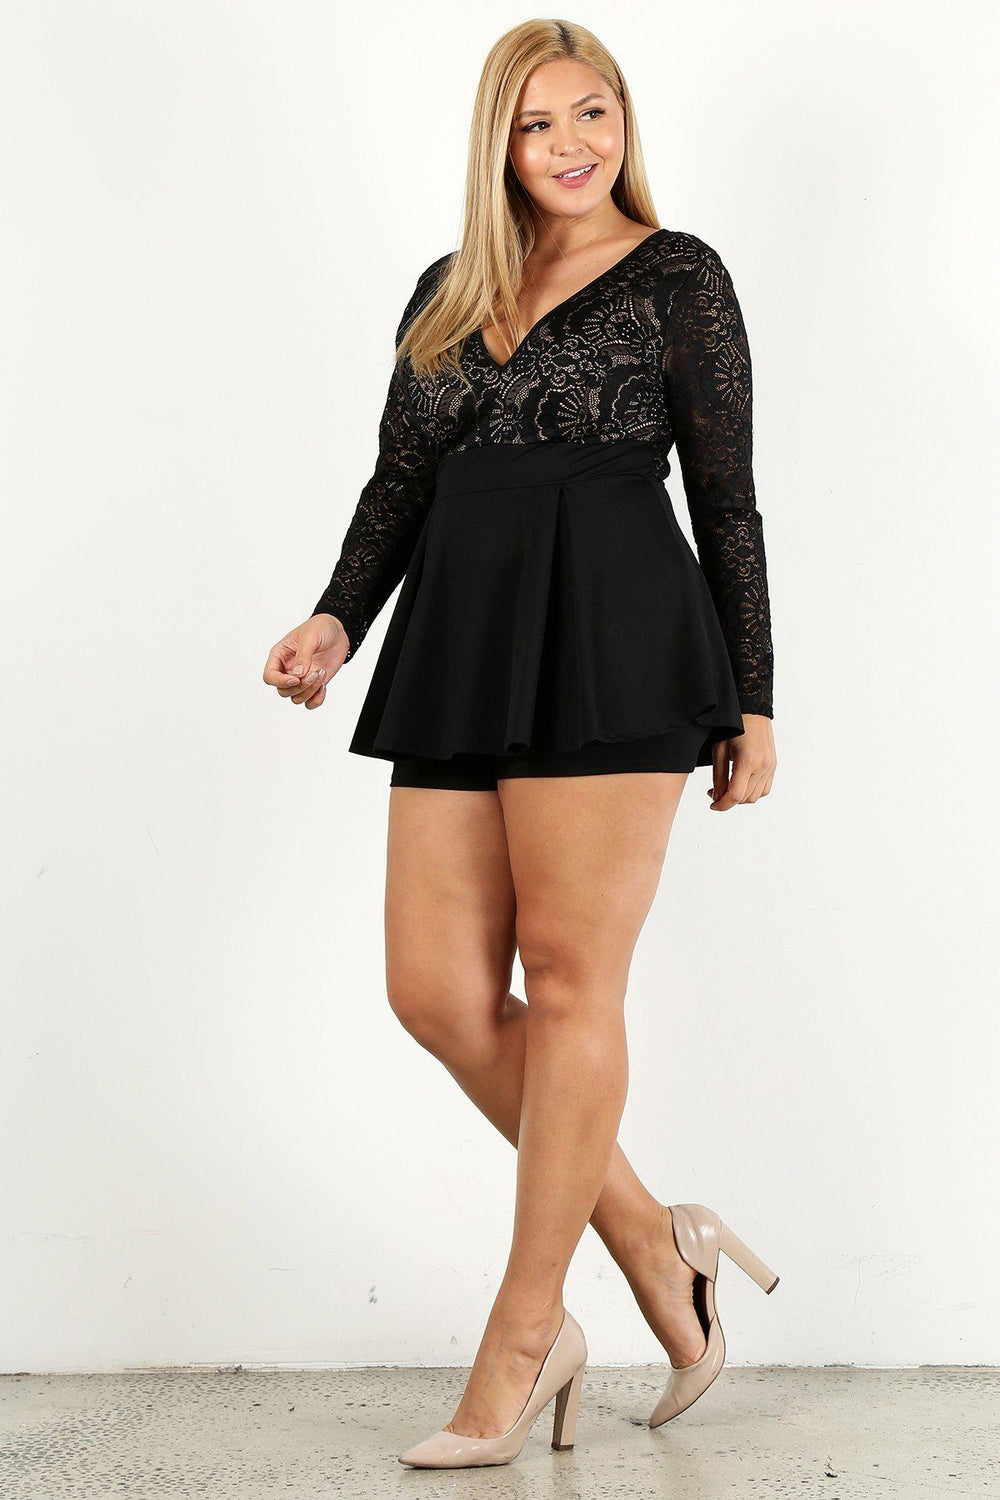 Duo Fabric Romper With Lace Detail, Peplum Bodice, And V-neckline